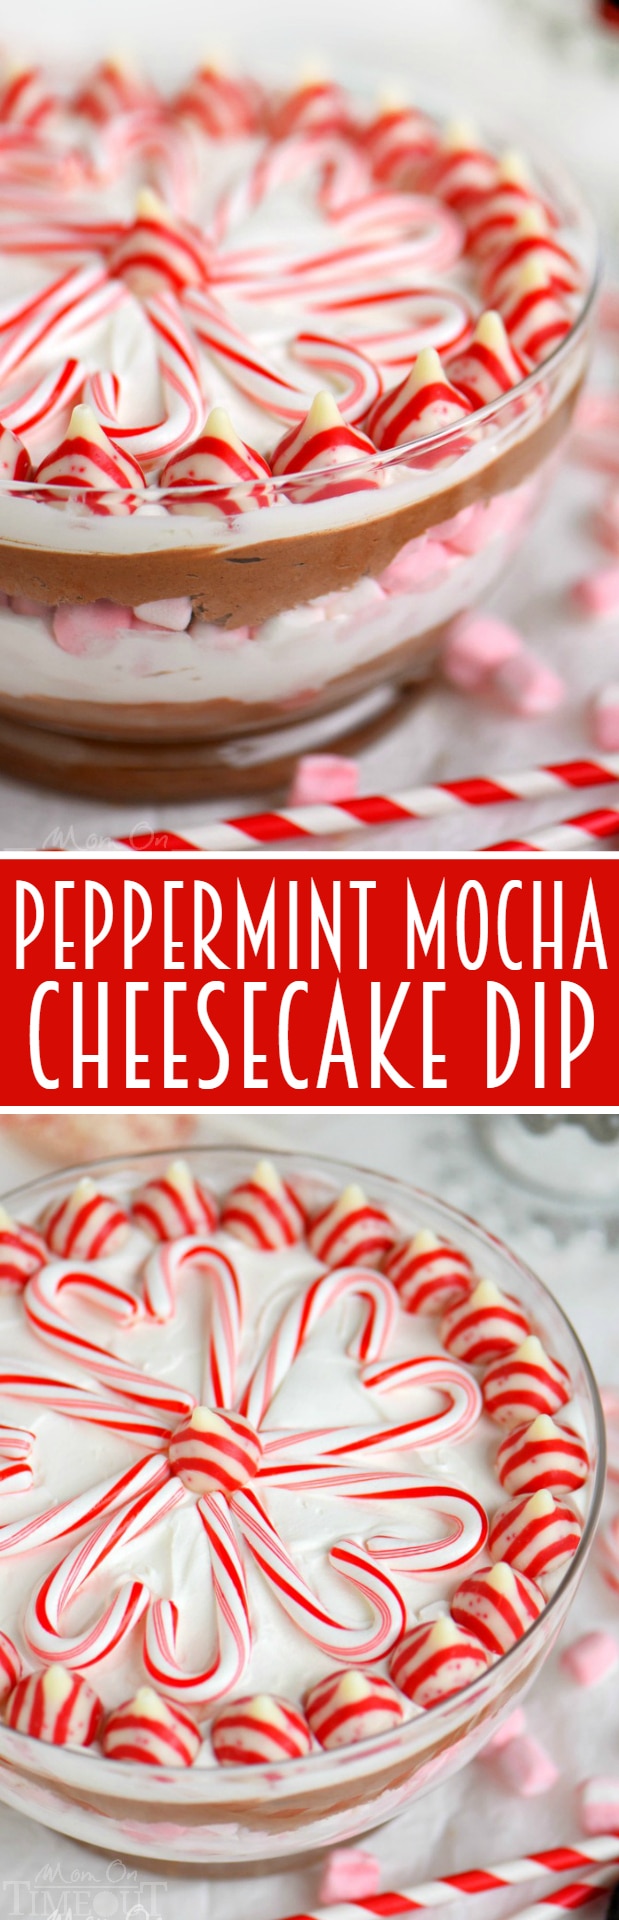 This easy Layered Peppermint Mocha Cheesecake Dip will be the STAR of all your holiday parties! With it's fun, colorful layers, and 5 minute prep time, everyone wins! Works beautifully as a holiday appetizer or dessert!